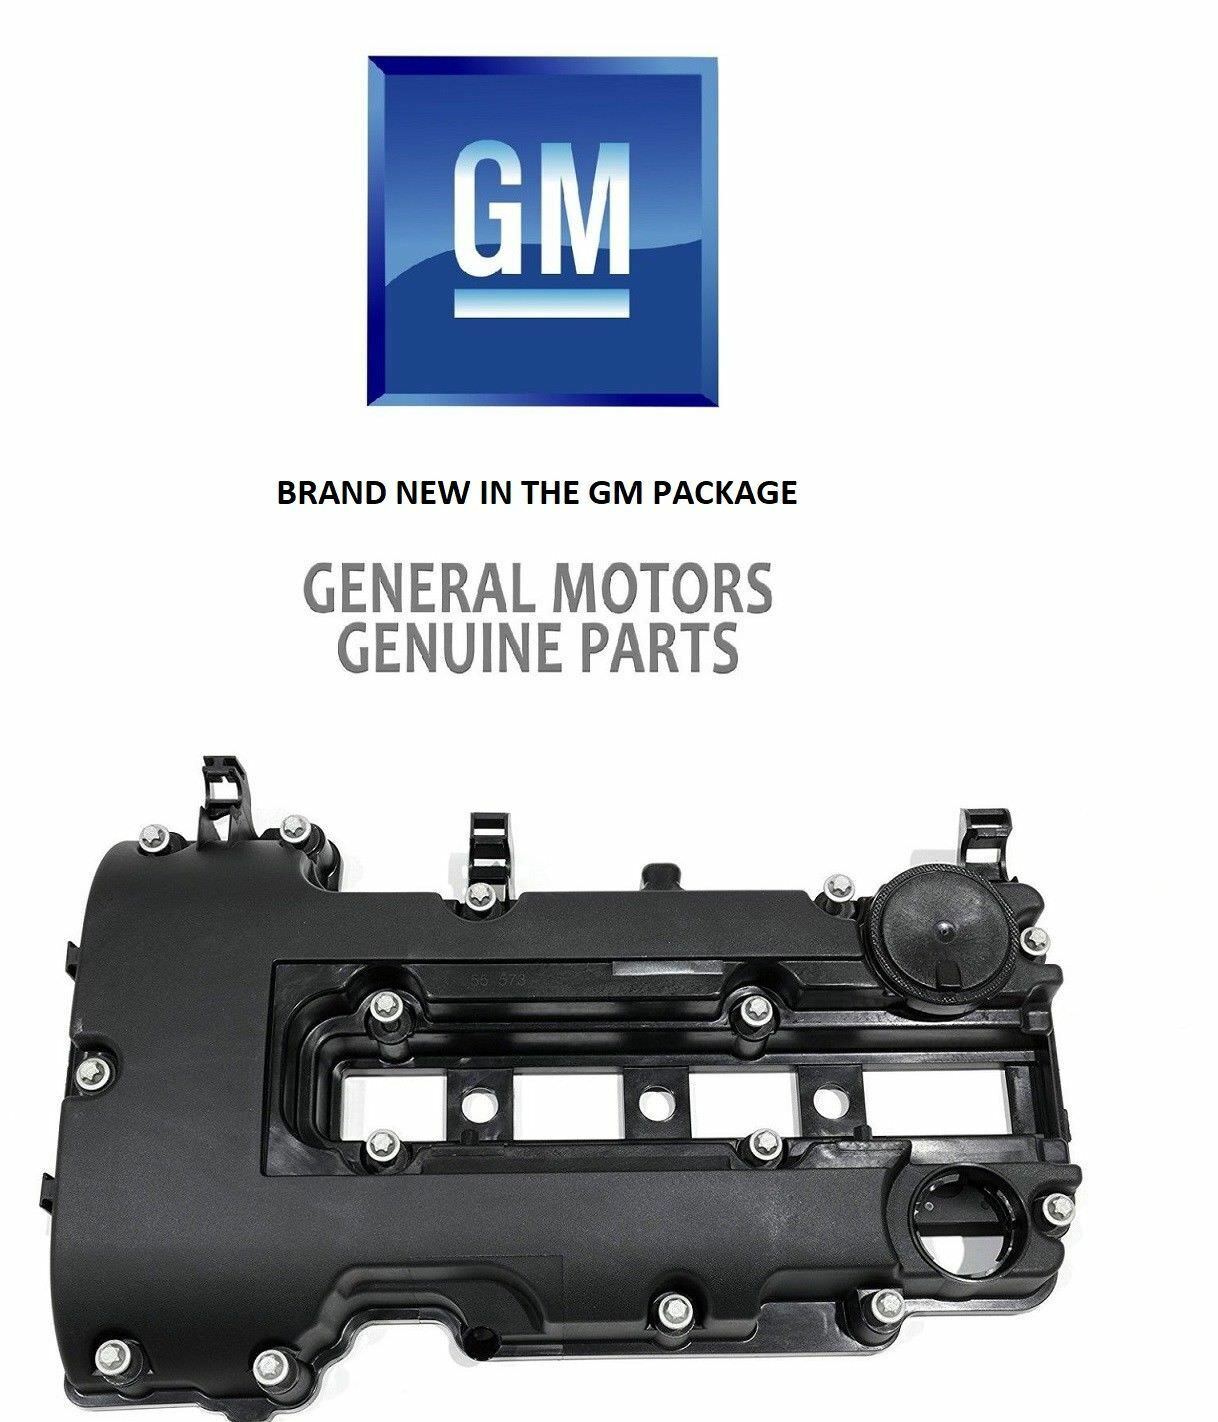 Oem 2011-2016 Cruze Sonic Trax Encore Buick Gm 1.4l Valve Cover W/seal 25198874